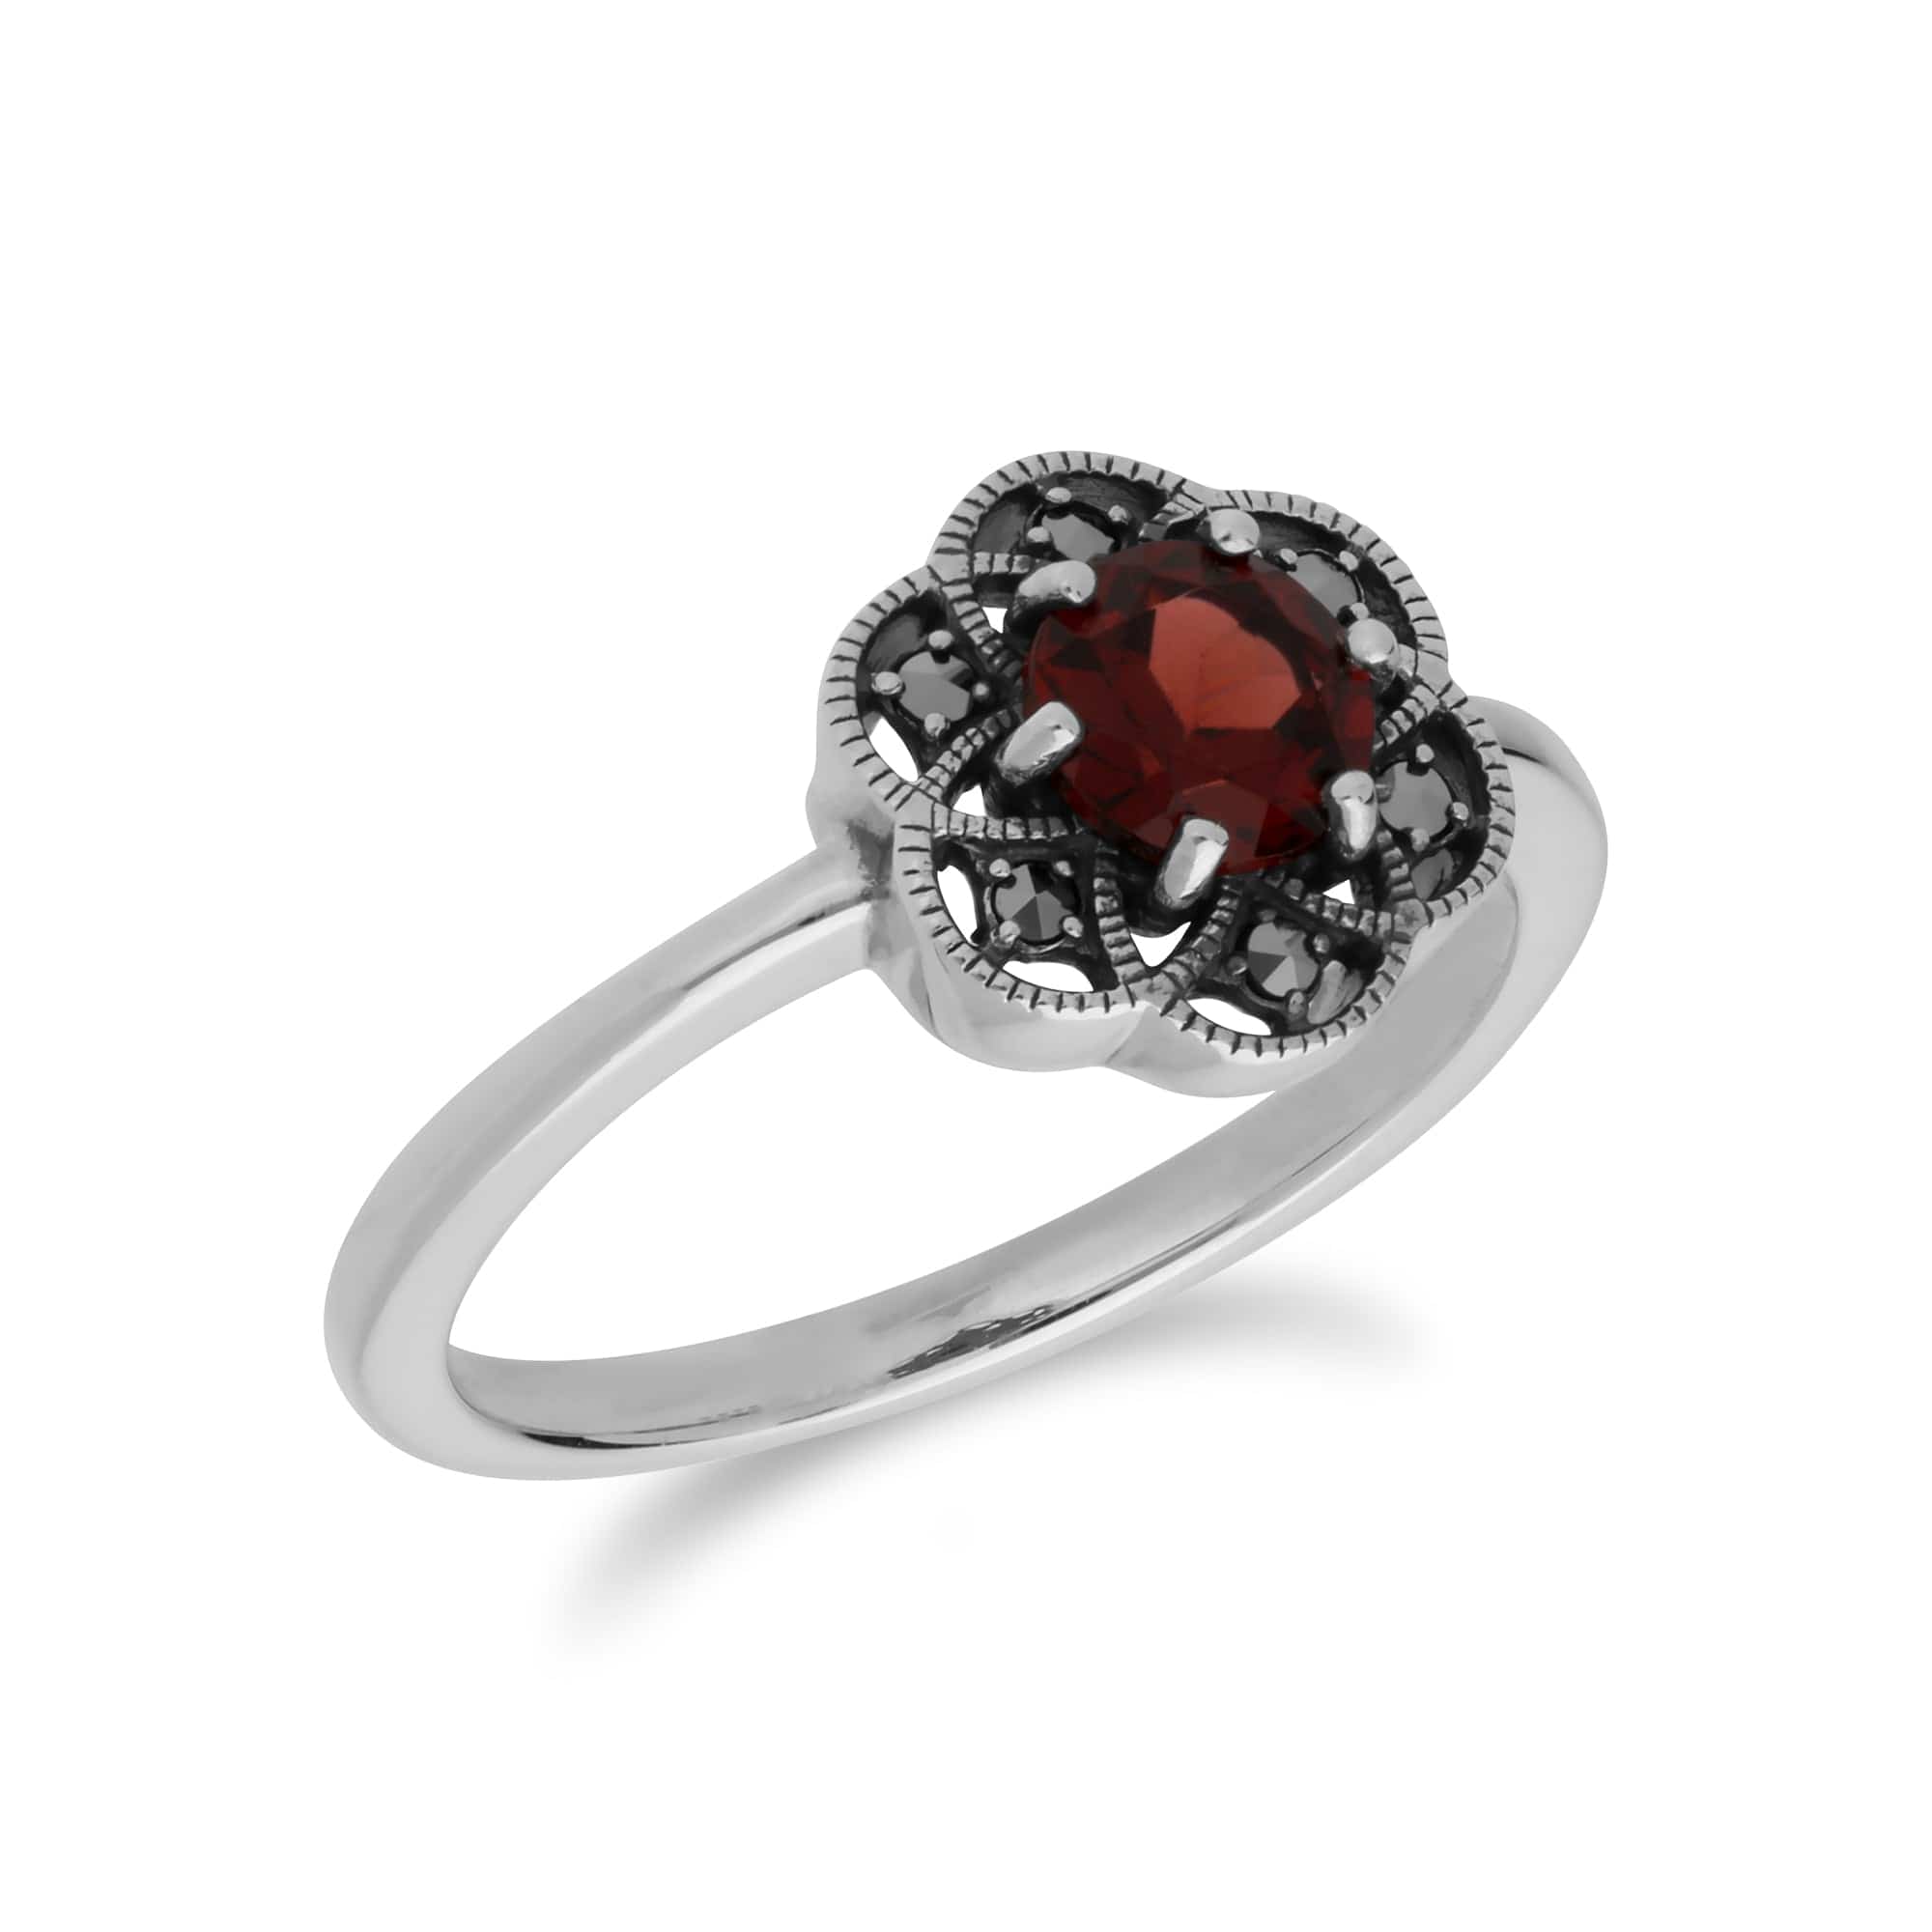 214R599403925 Floral Round Garnet & Marcasite Daisy Ring in 925 Sterling Silver 2